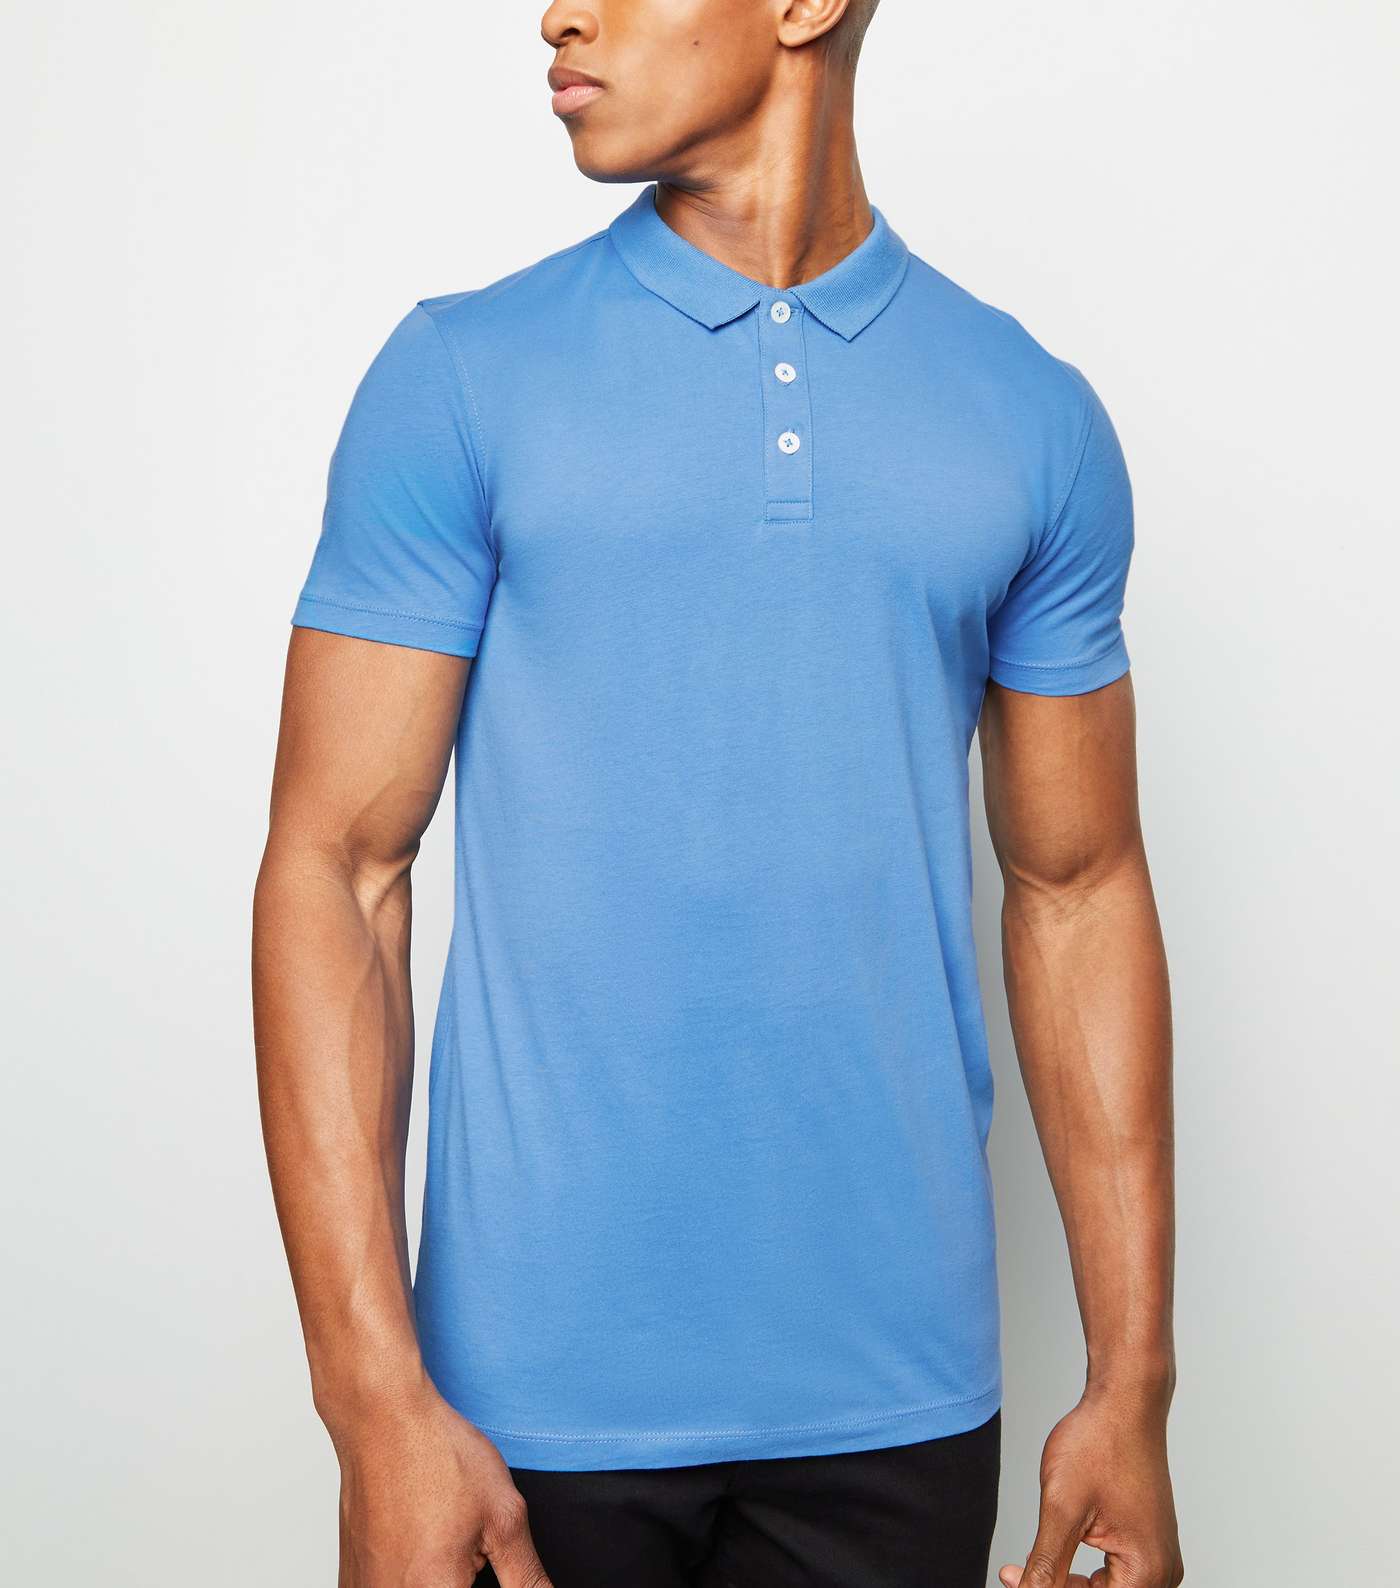 Bright Blue Muscle Fit Polo Shirt